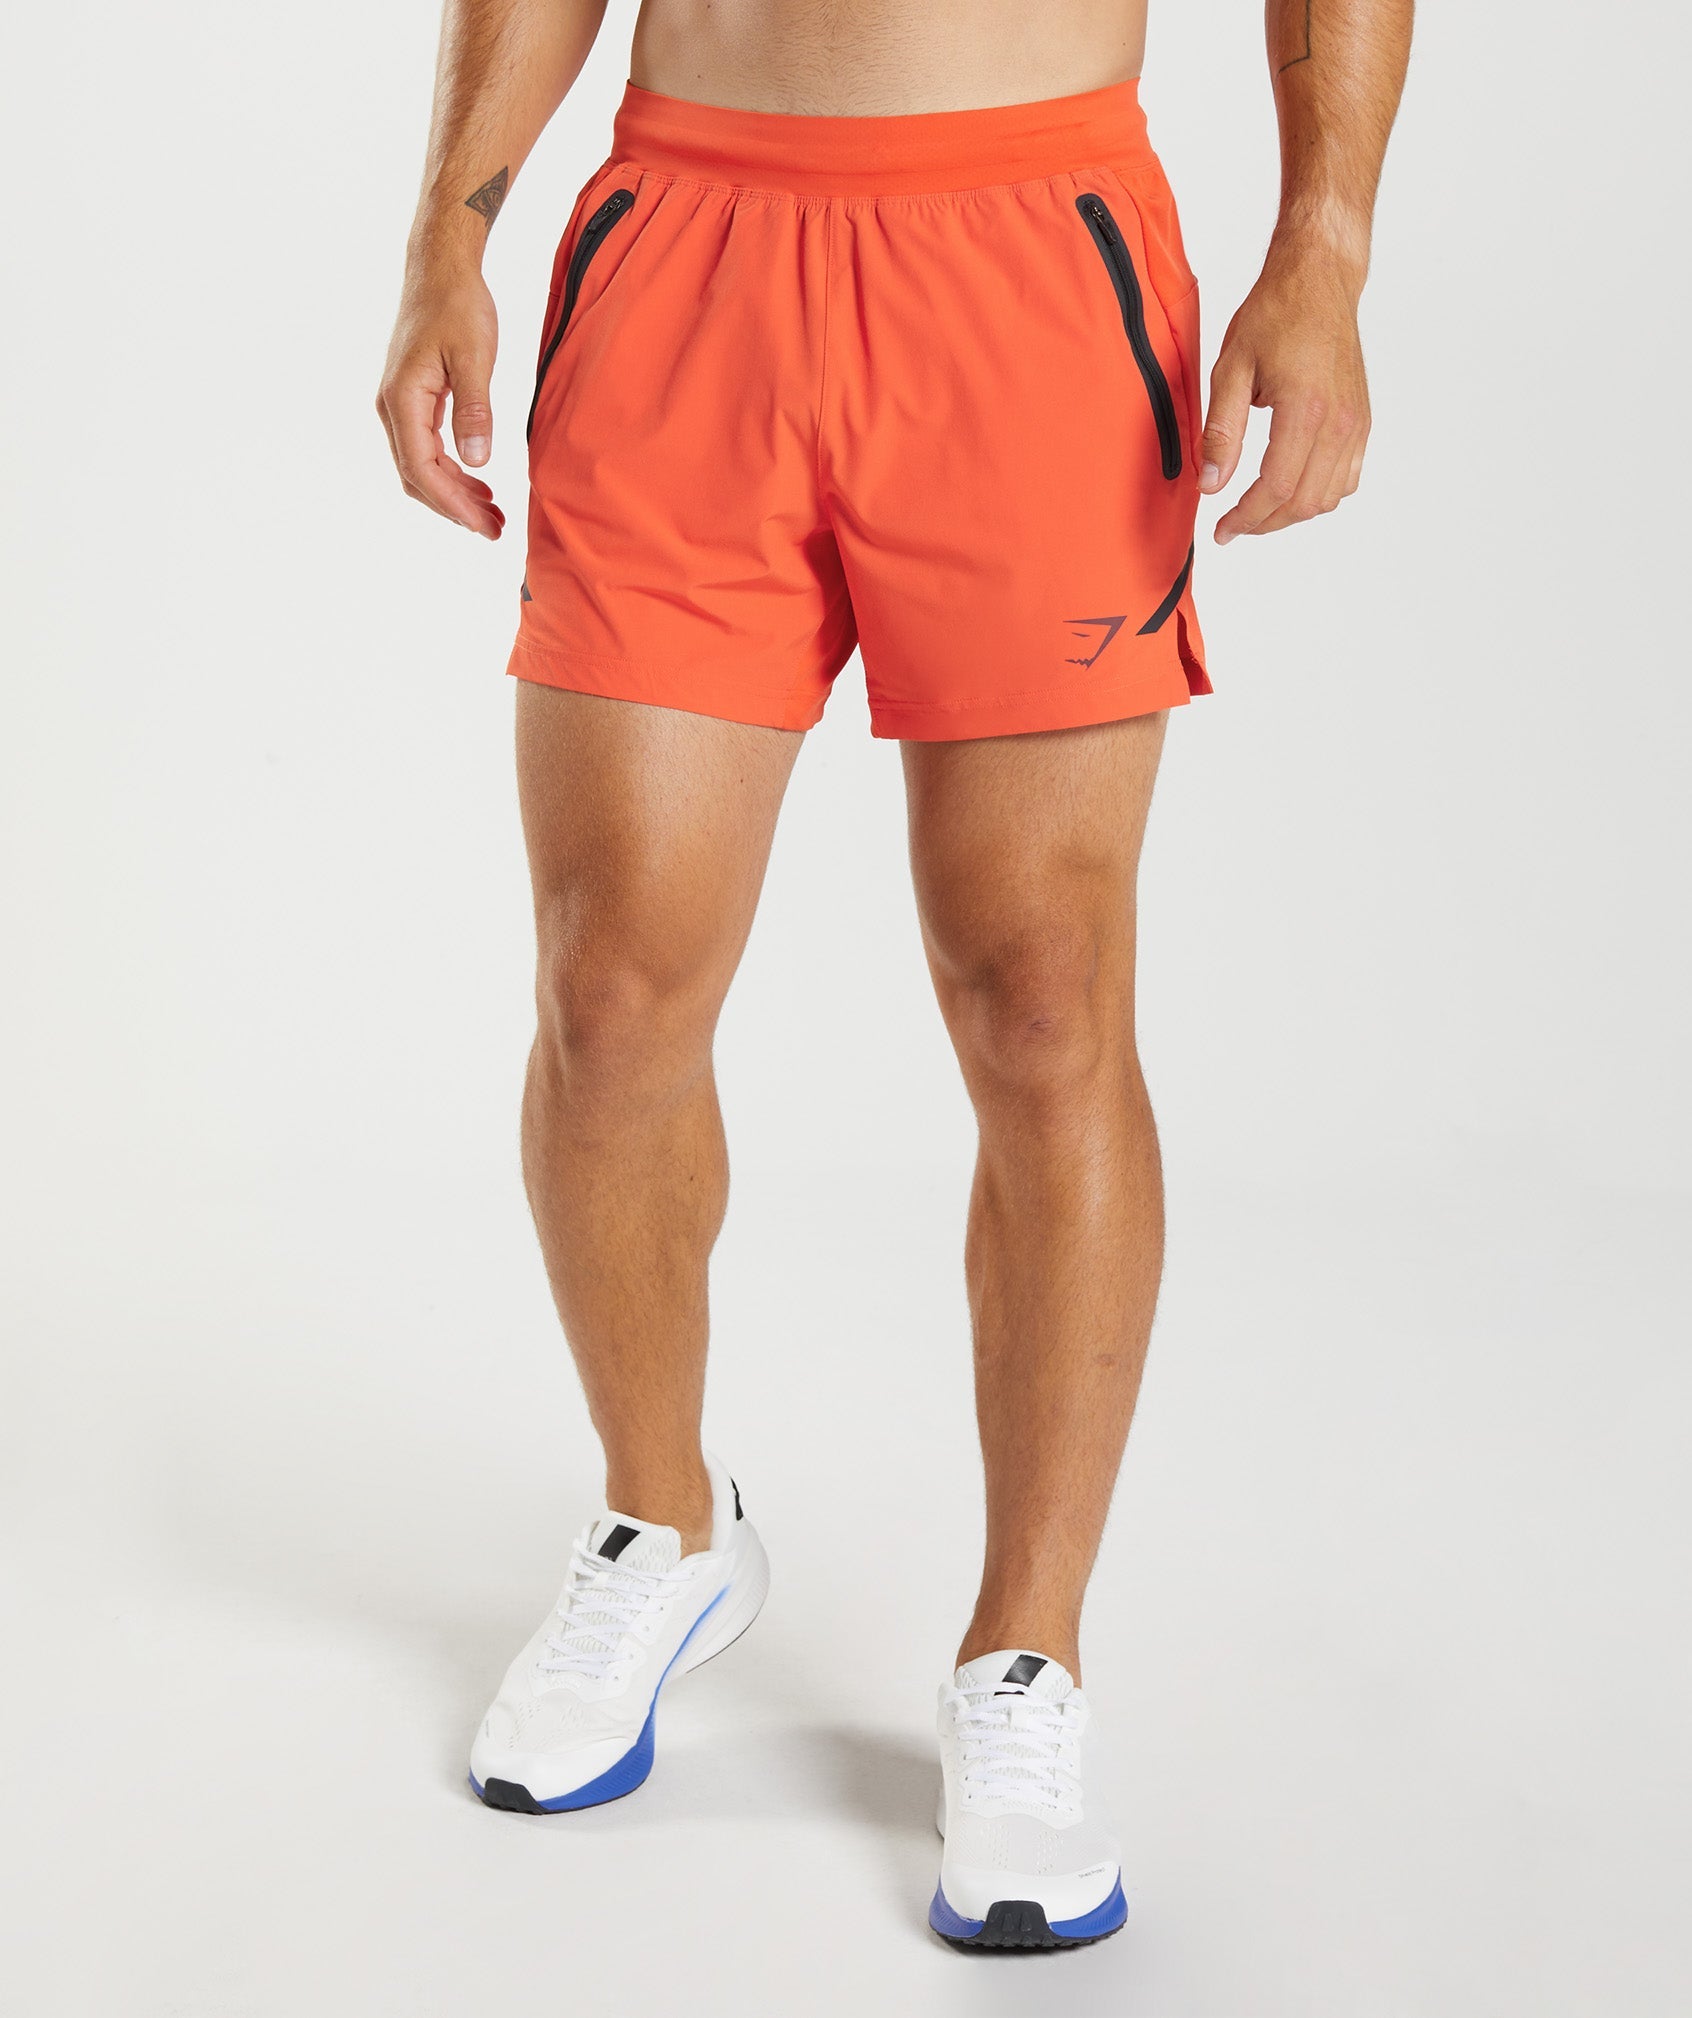 Apex 5" Perform Shorts in Pepper Red